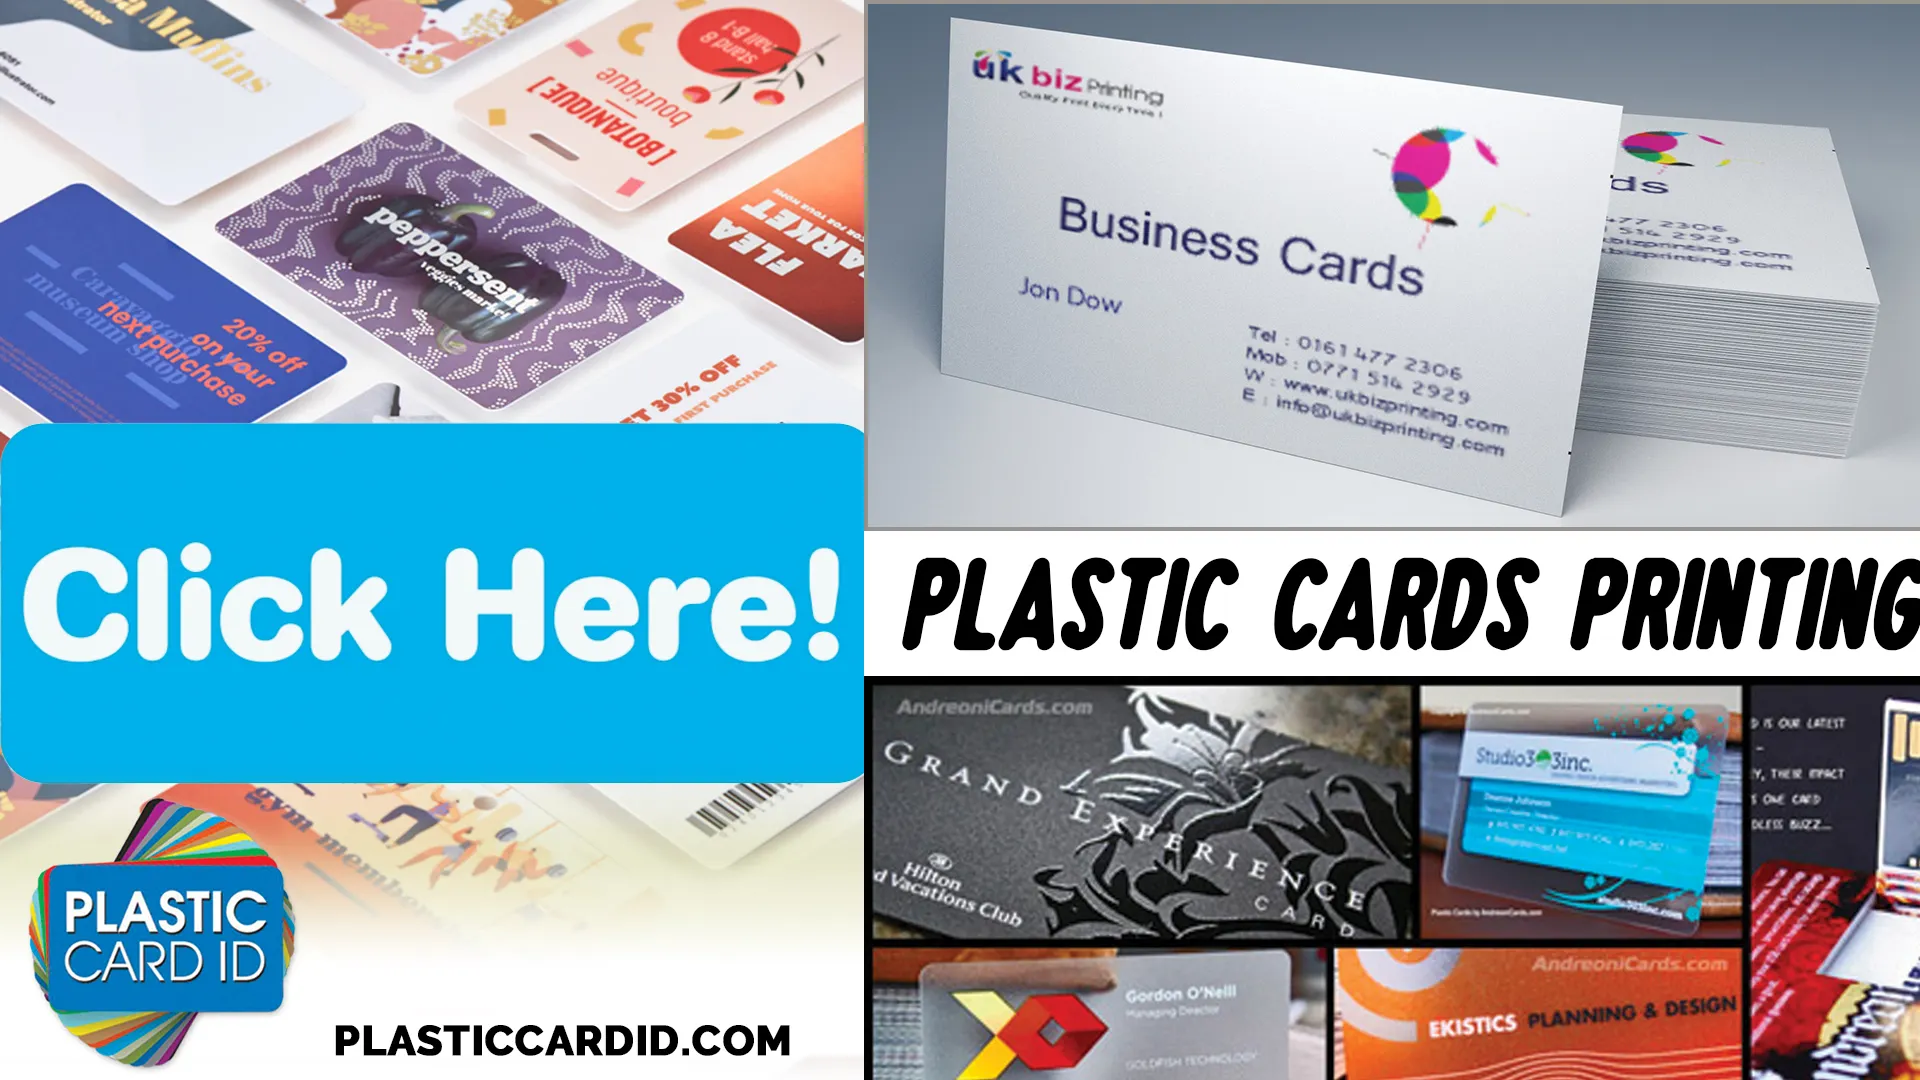 Making Your Card Stand Out